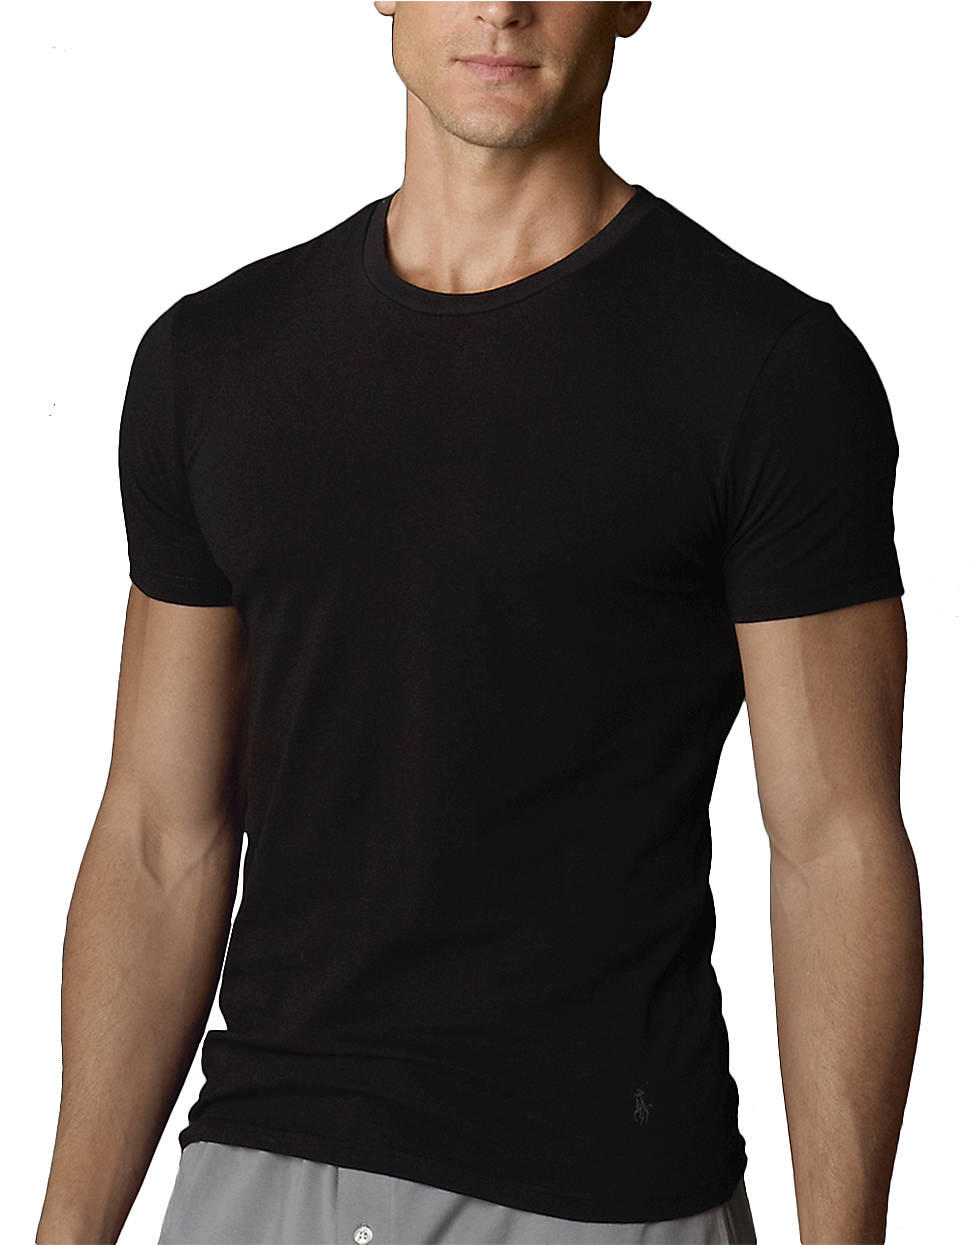 Lyst - Polo ralph lauren Two Pack Slim Fit Crewneck T-Shirts in Black ...